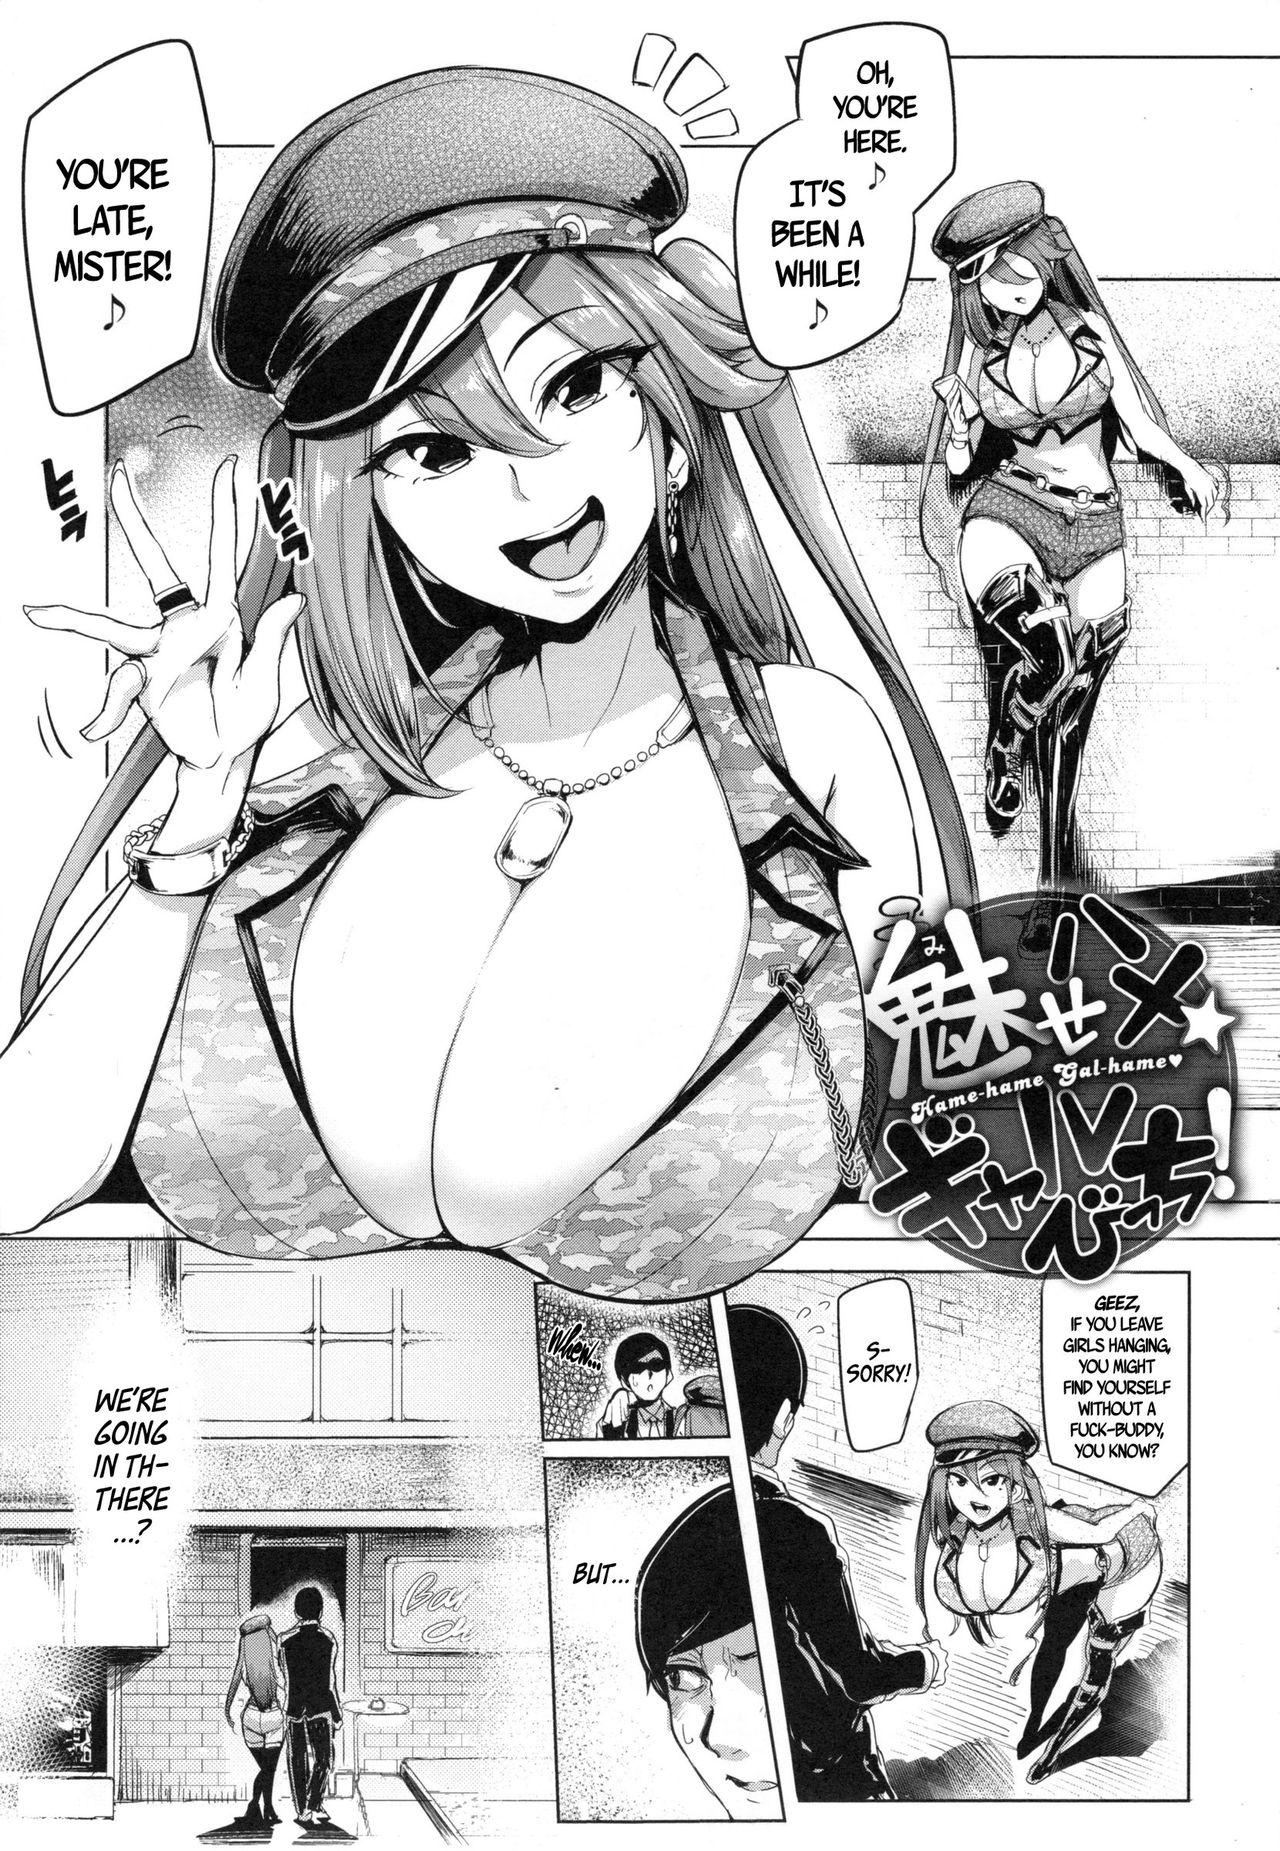 Sexy Girl Soku Hame Gal Bitch! + Mise Hame Gal Bitch! Assfucked - Page 5